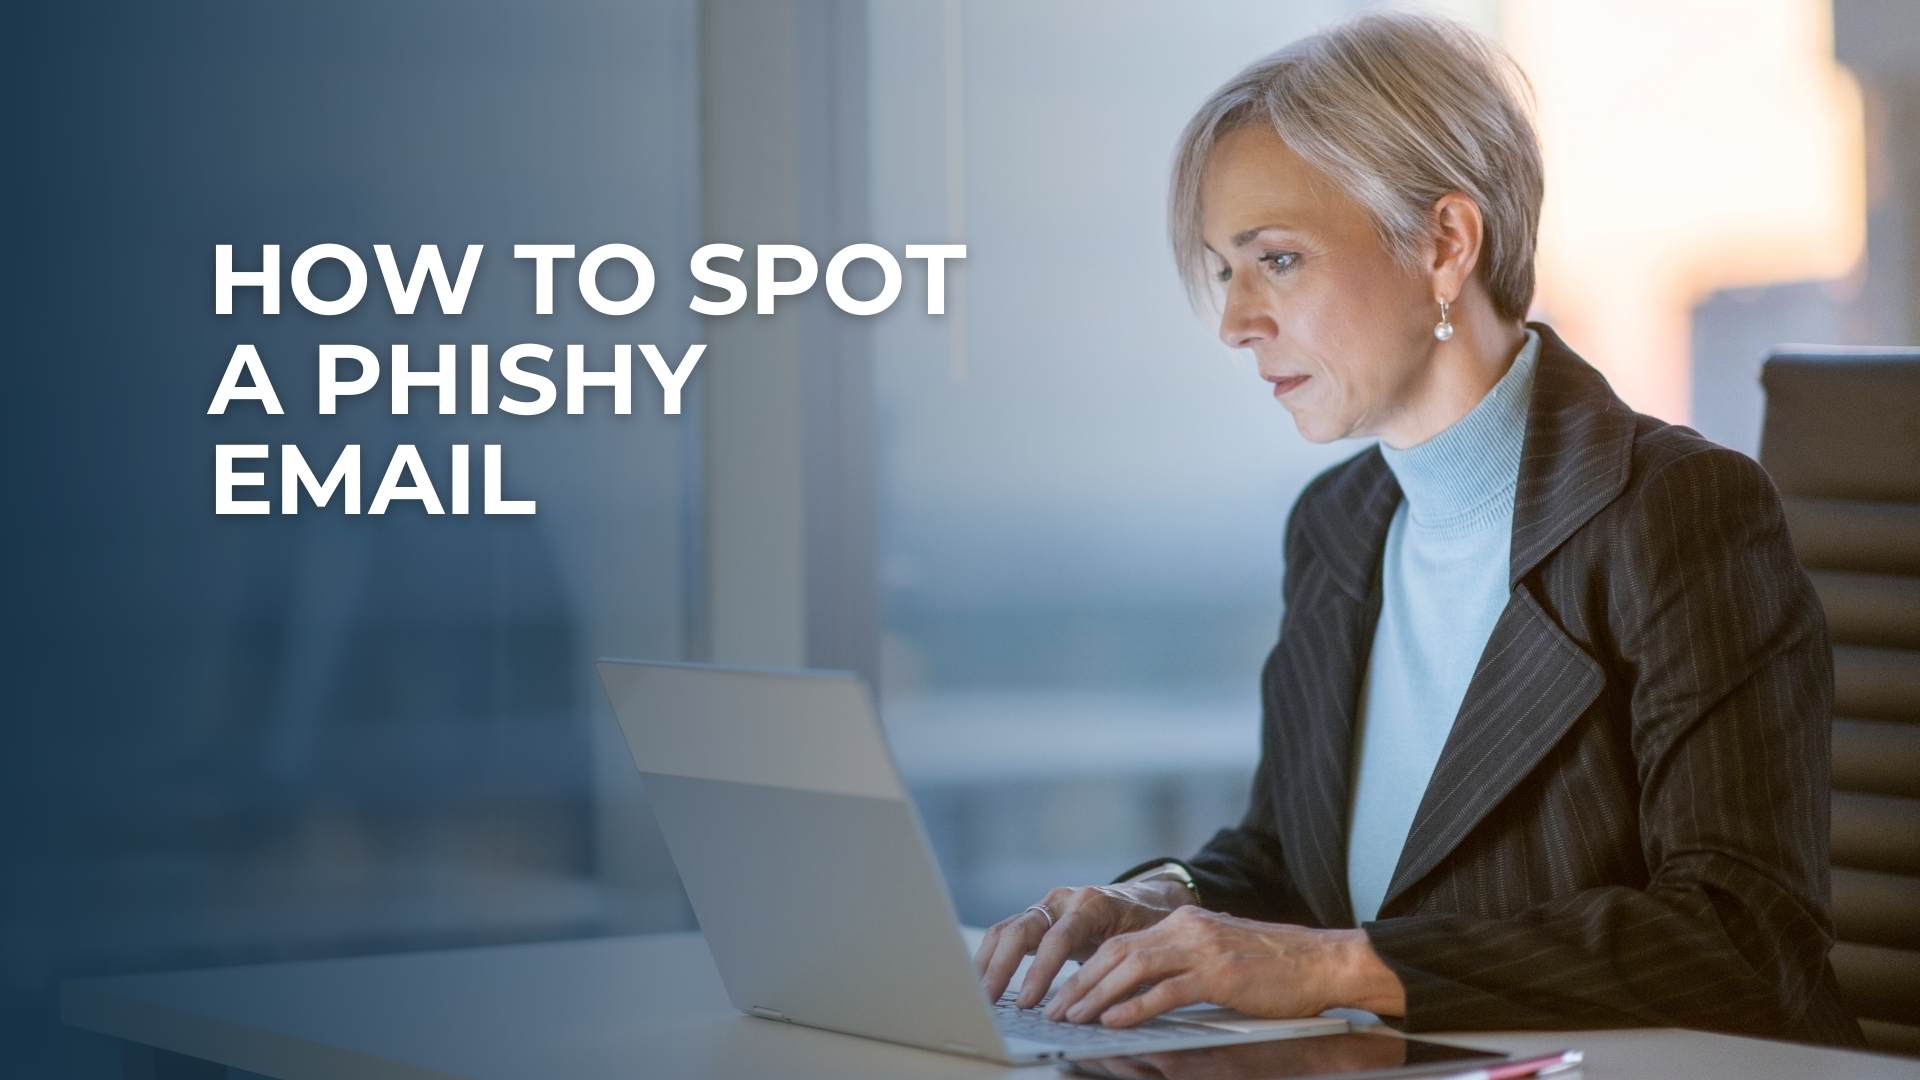 How To Spot a Phishy Email